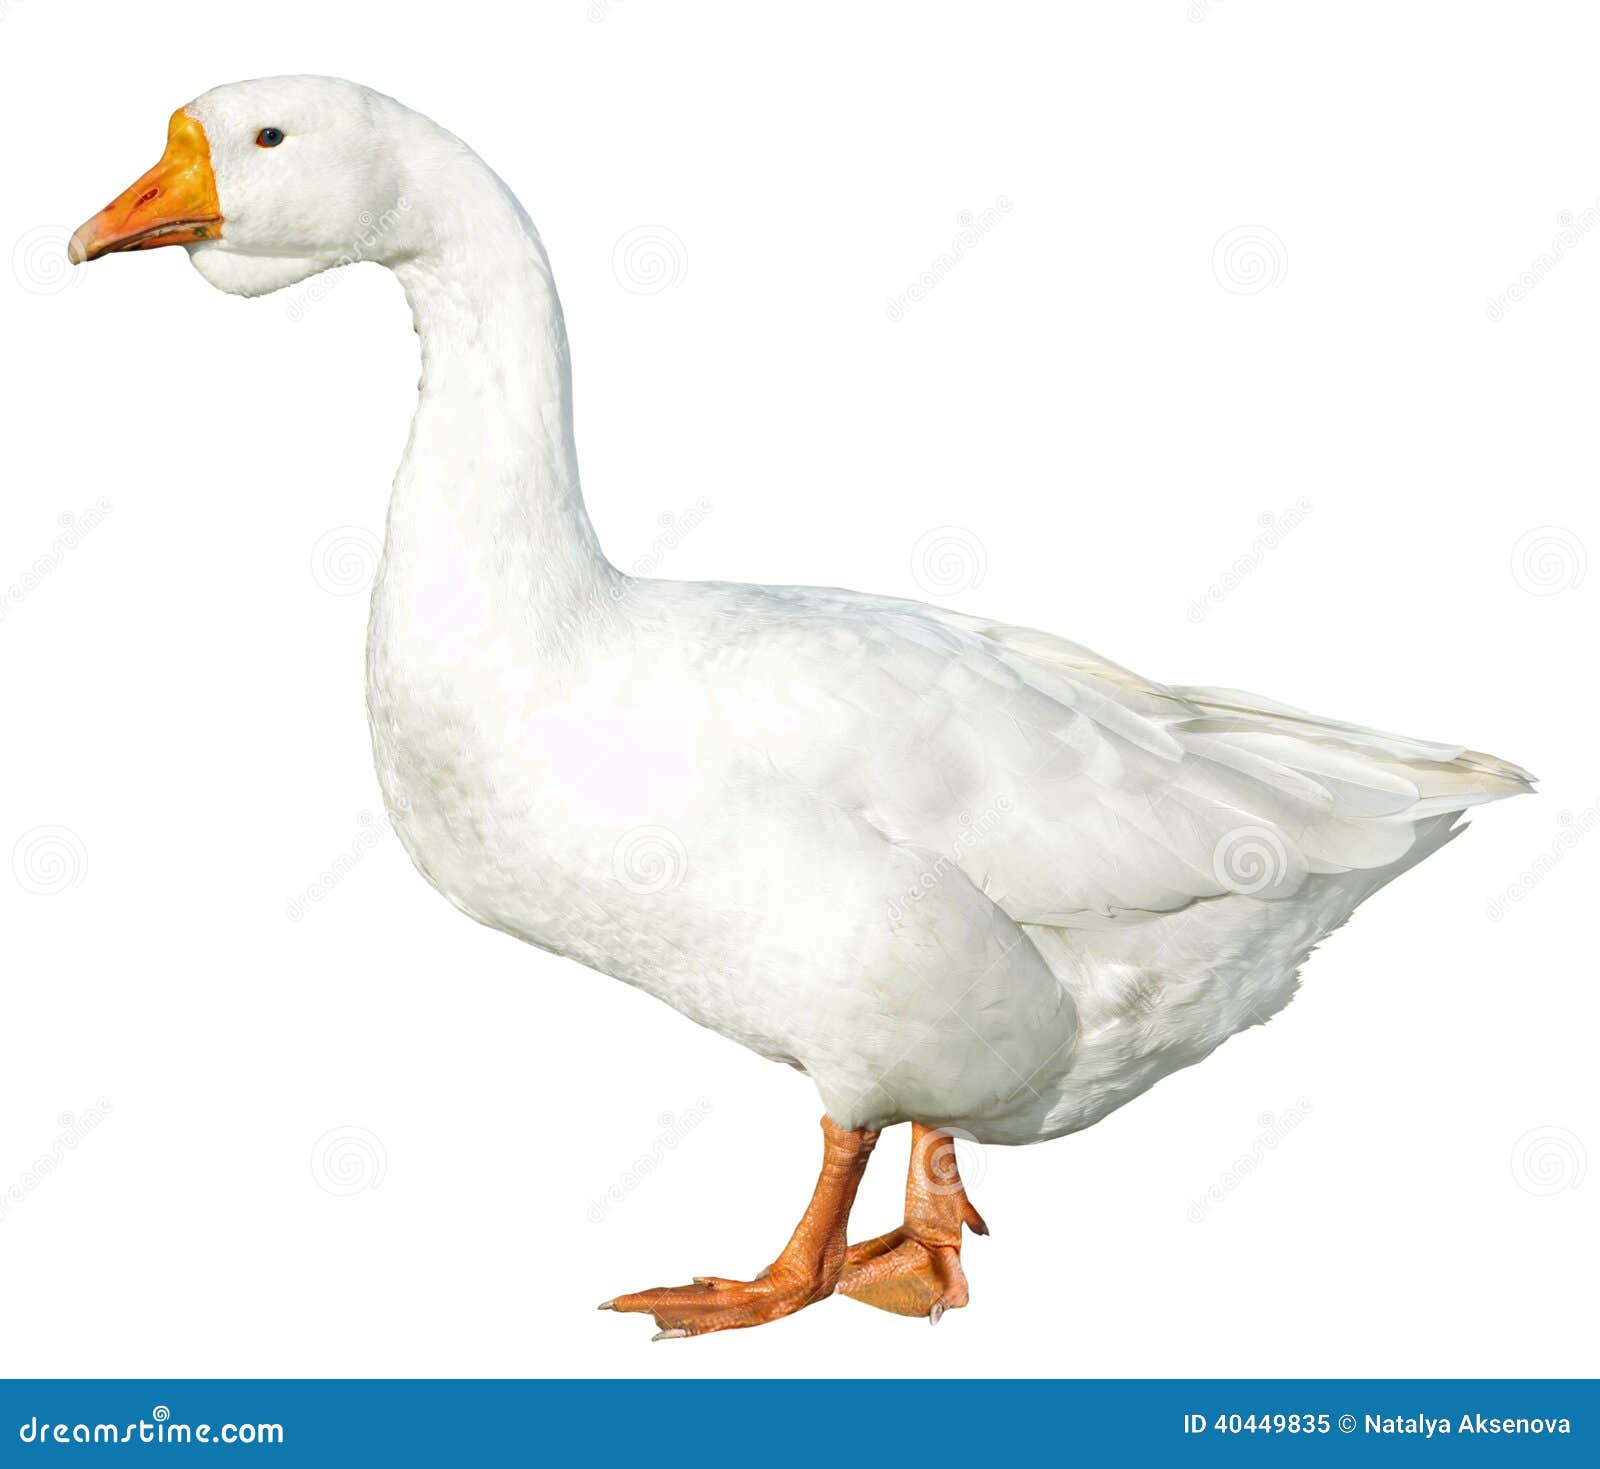 Domestic Goose (Anser anser domesticus) Dimensions & Drawings